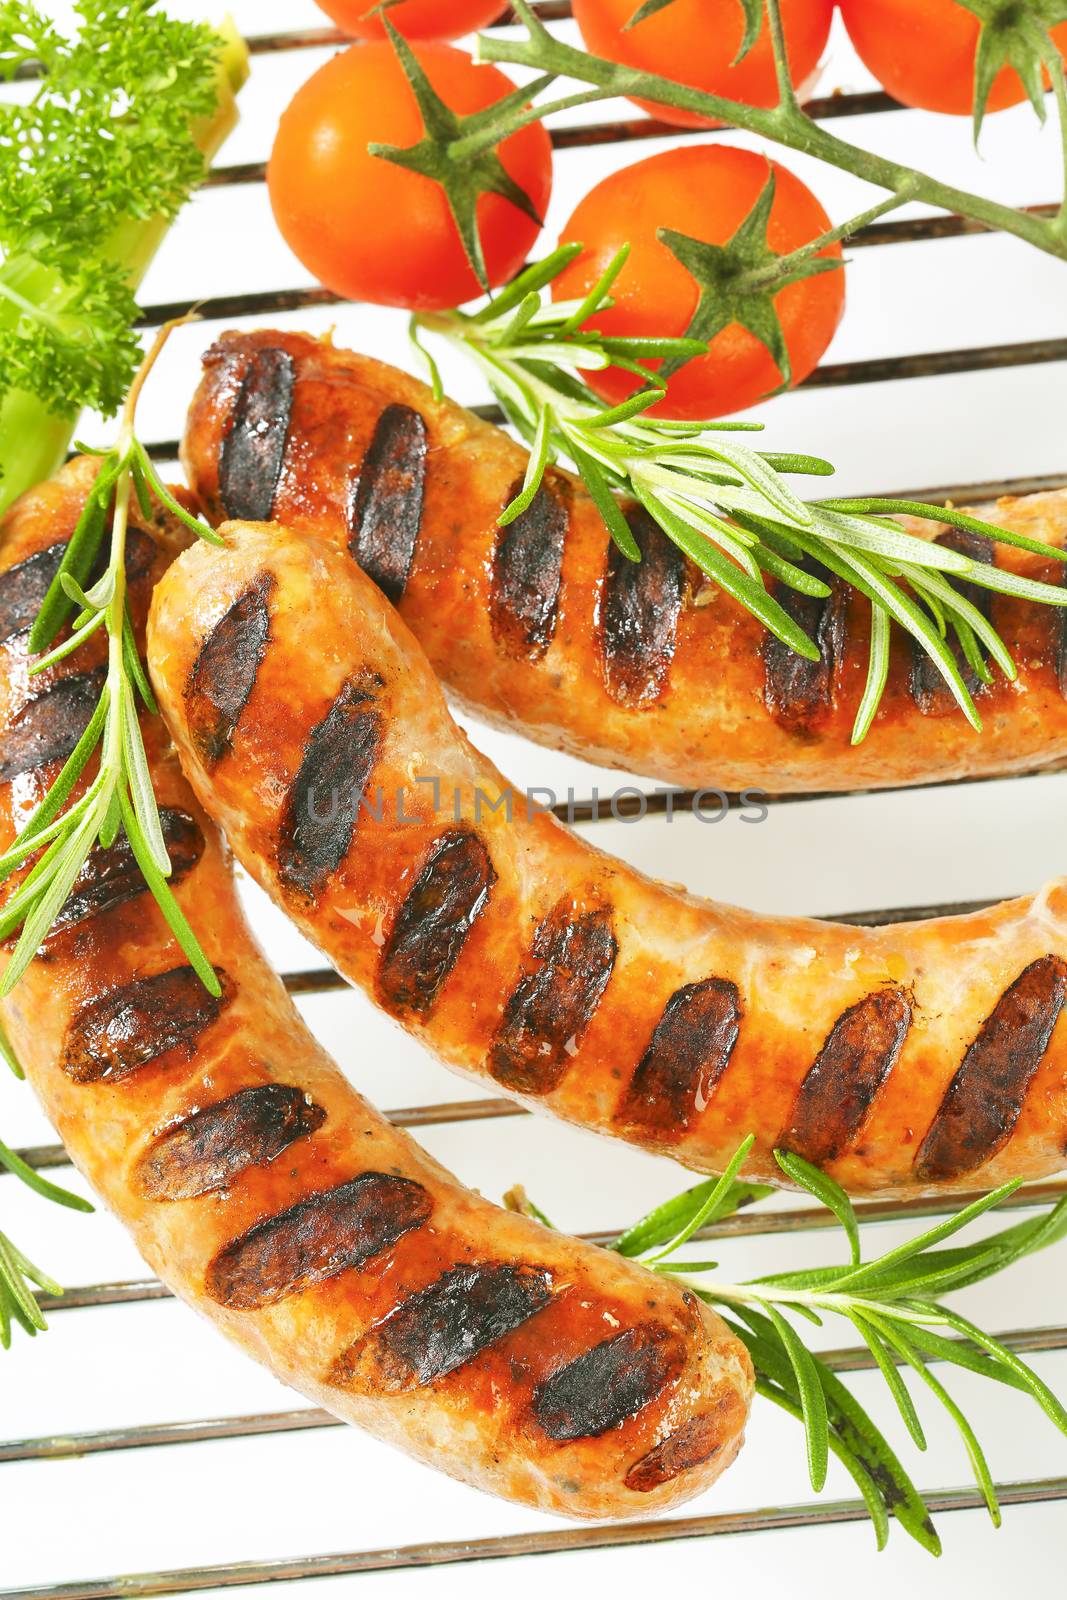 Grilled German sausages by Digifoodstock